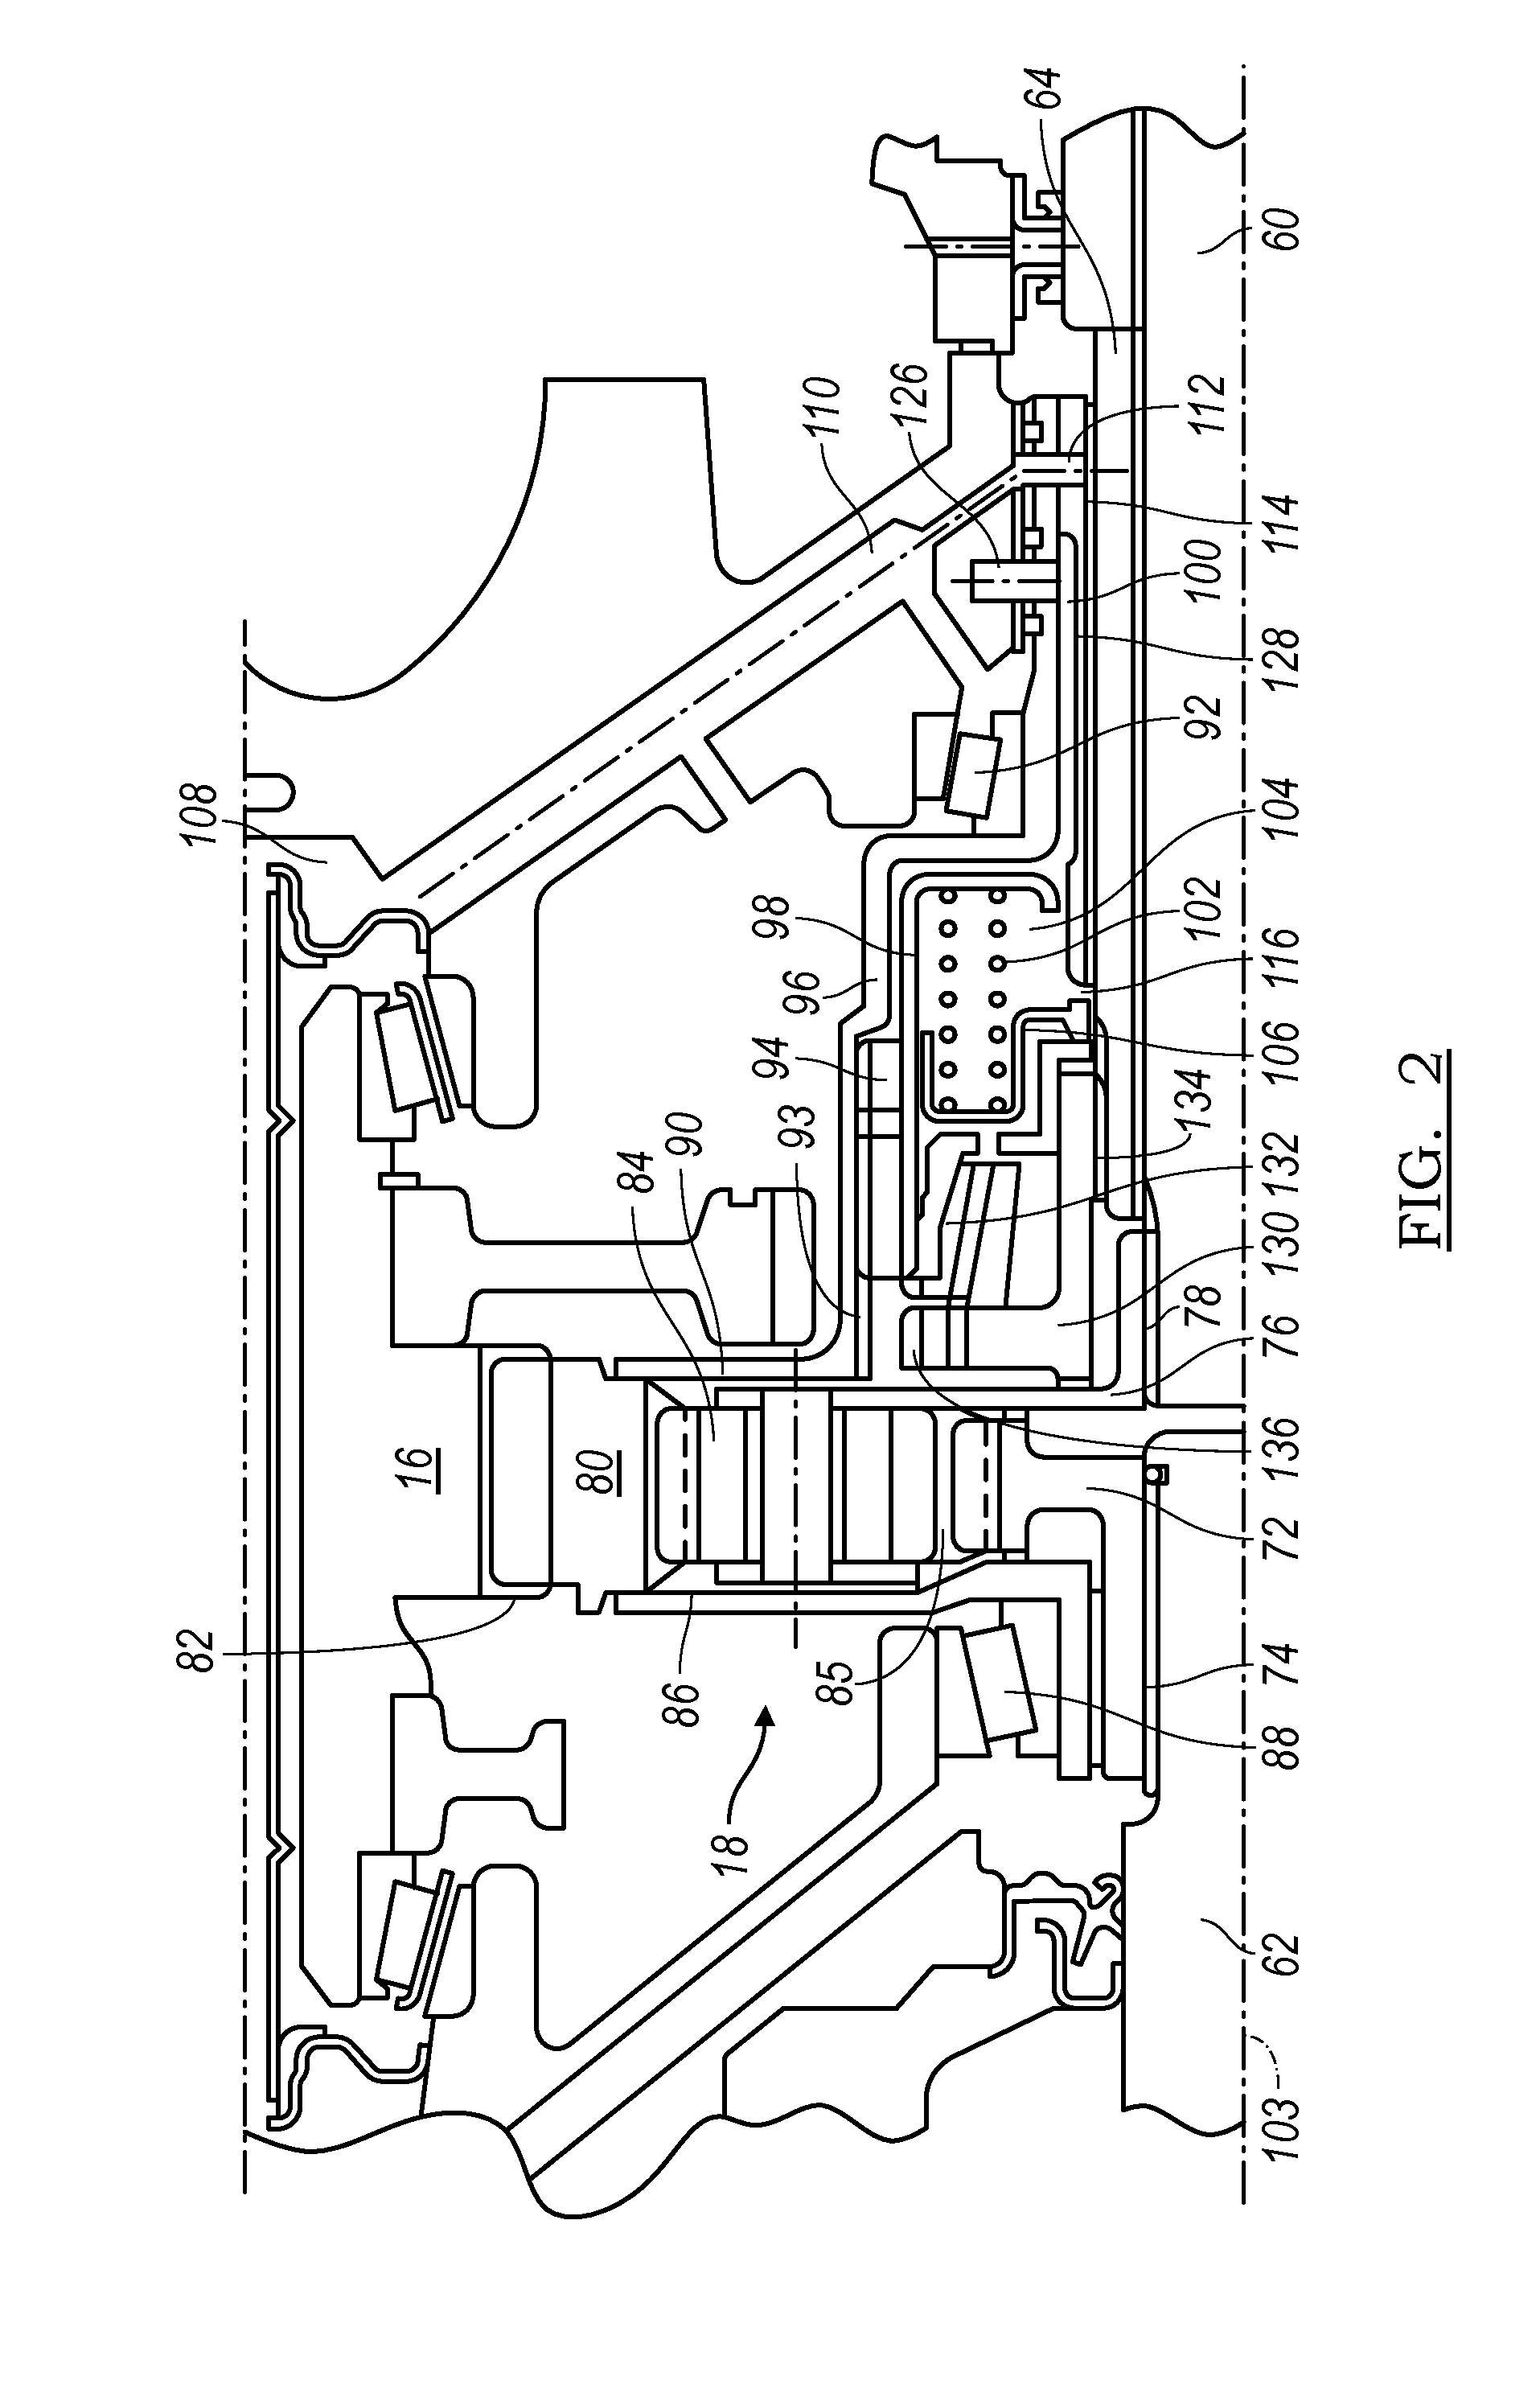 Automatic Control of Driveline States